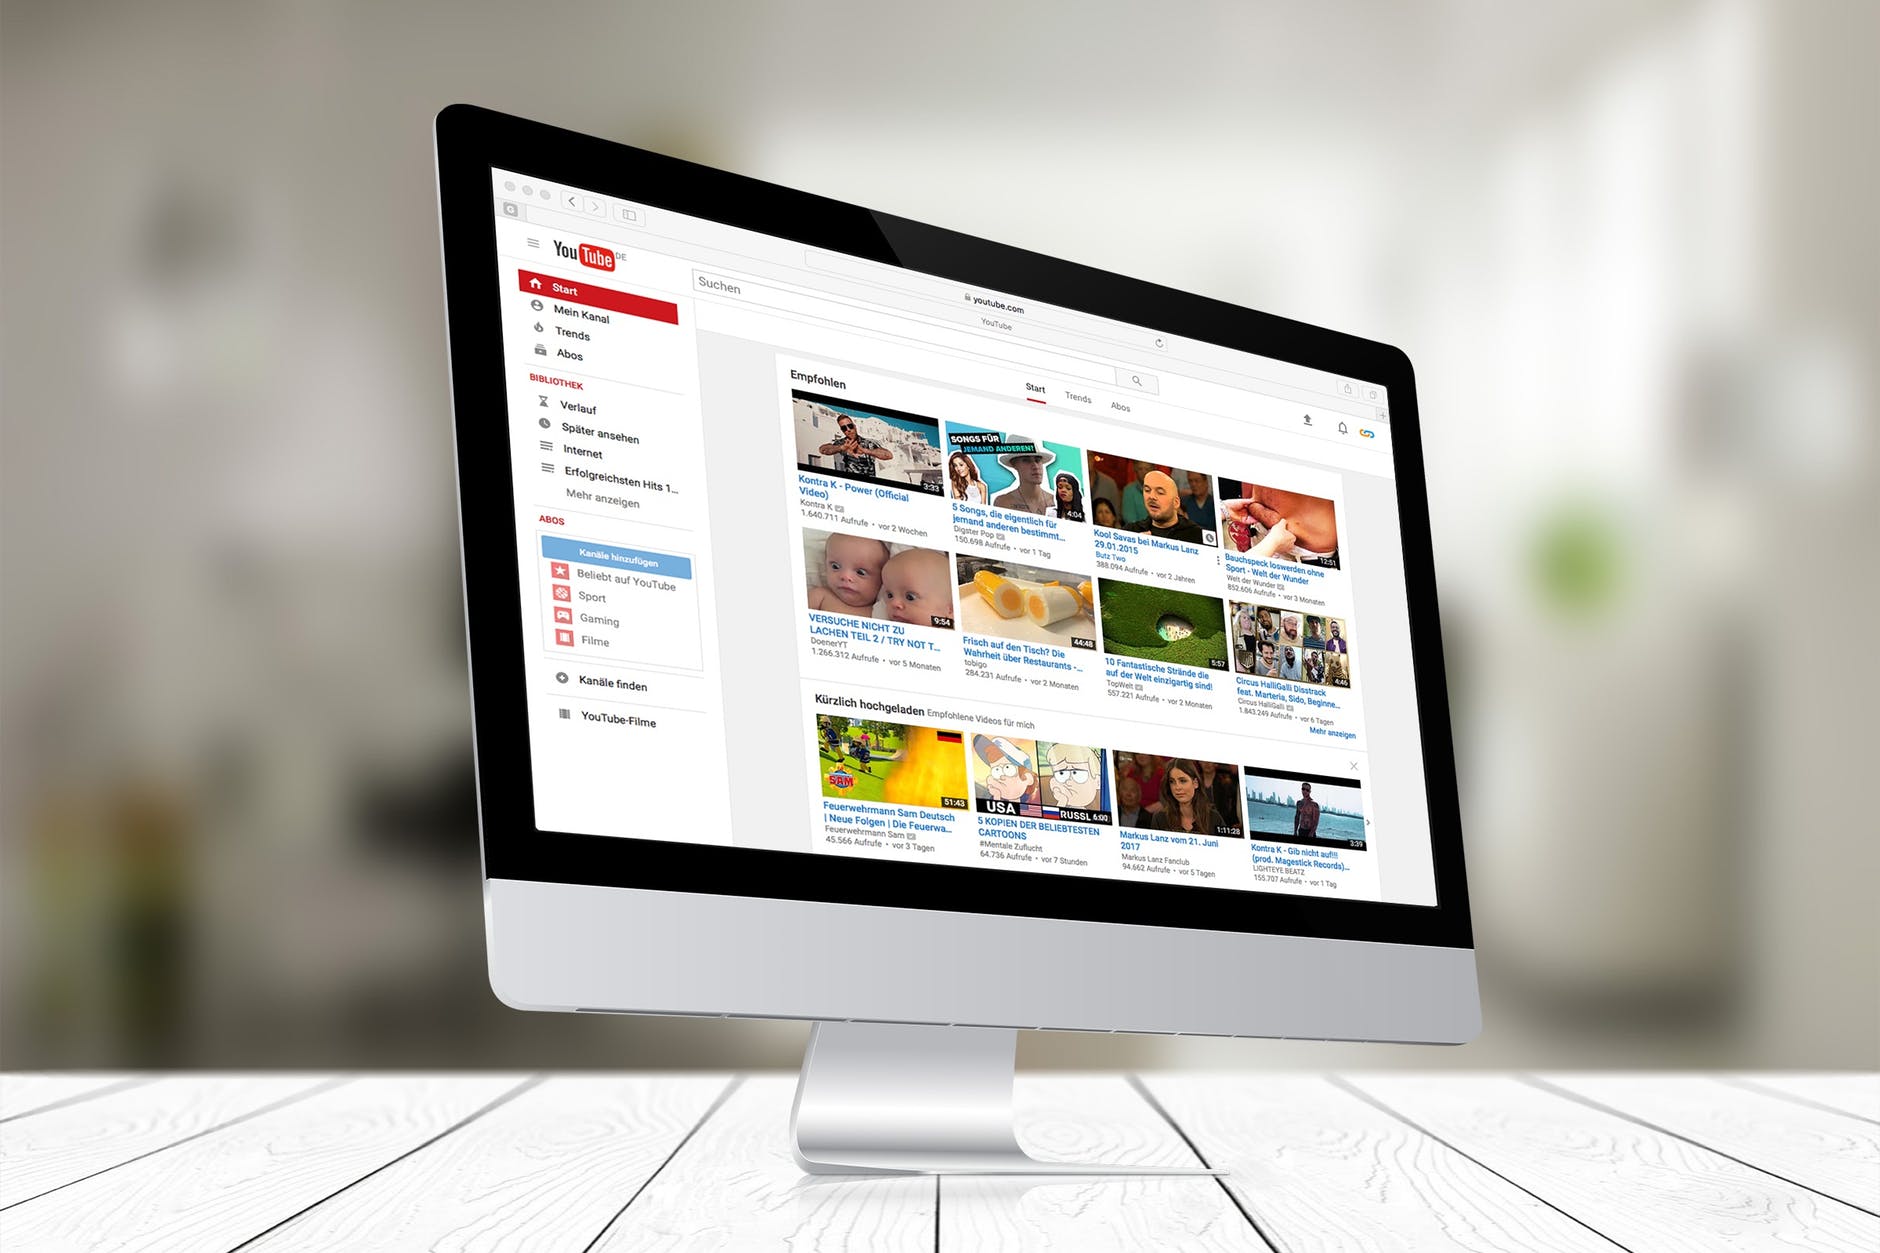 YouTube reveals three new features for content creators to generate more revenue